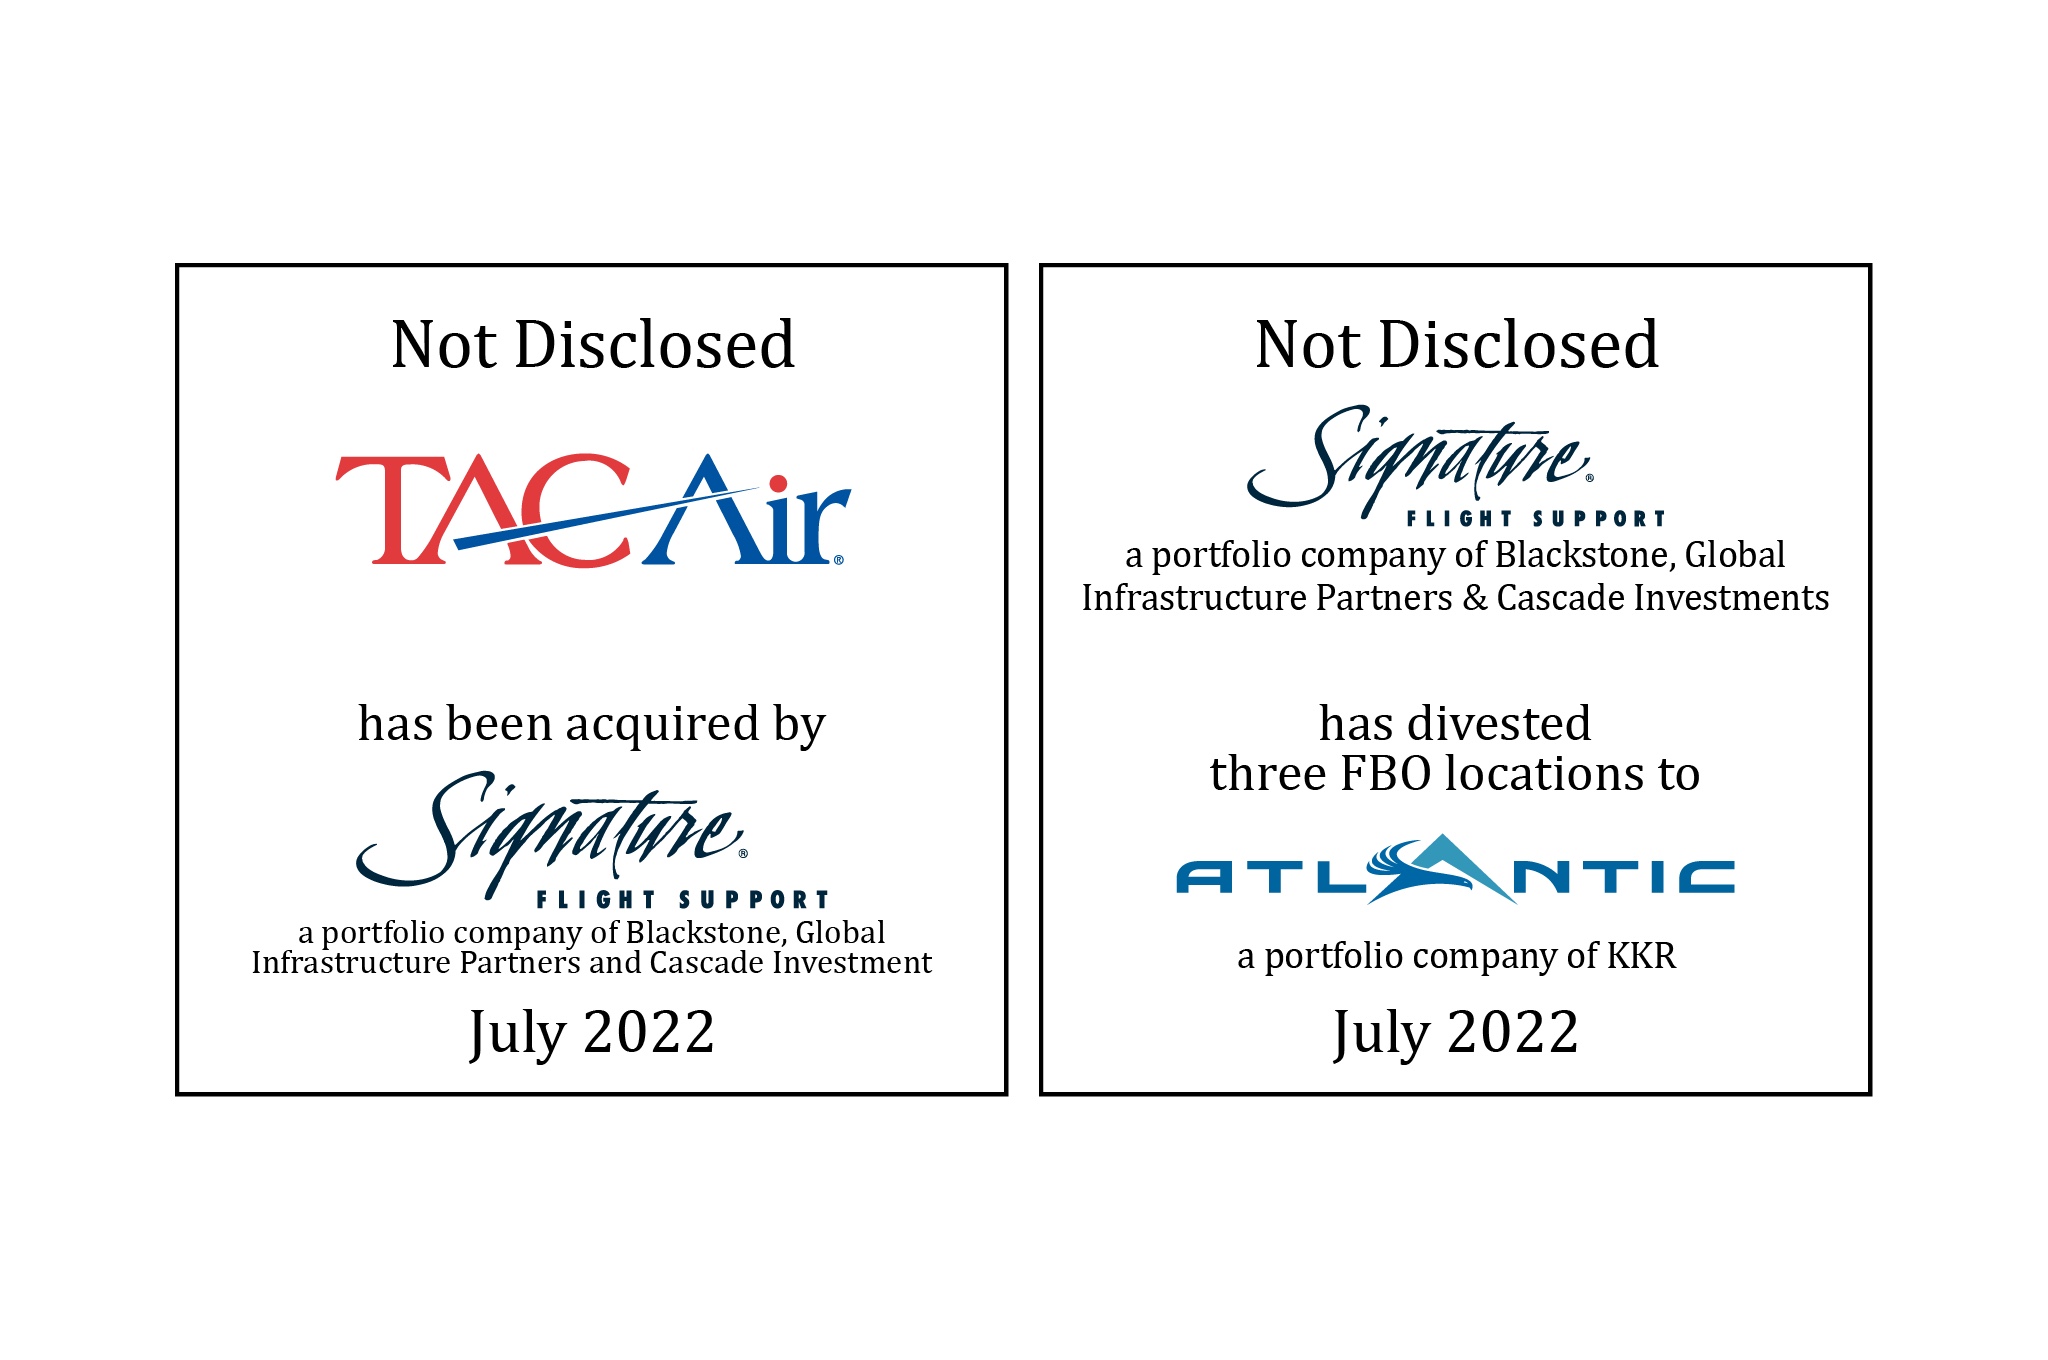 TAC Air has been acquired by Signature Flight Support